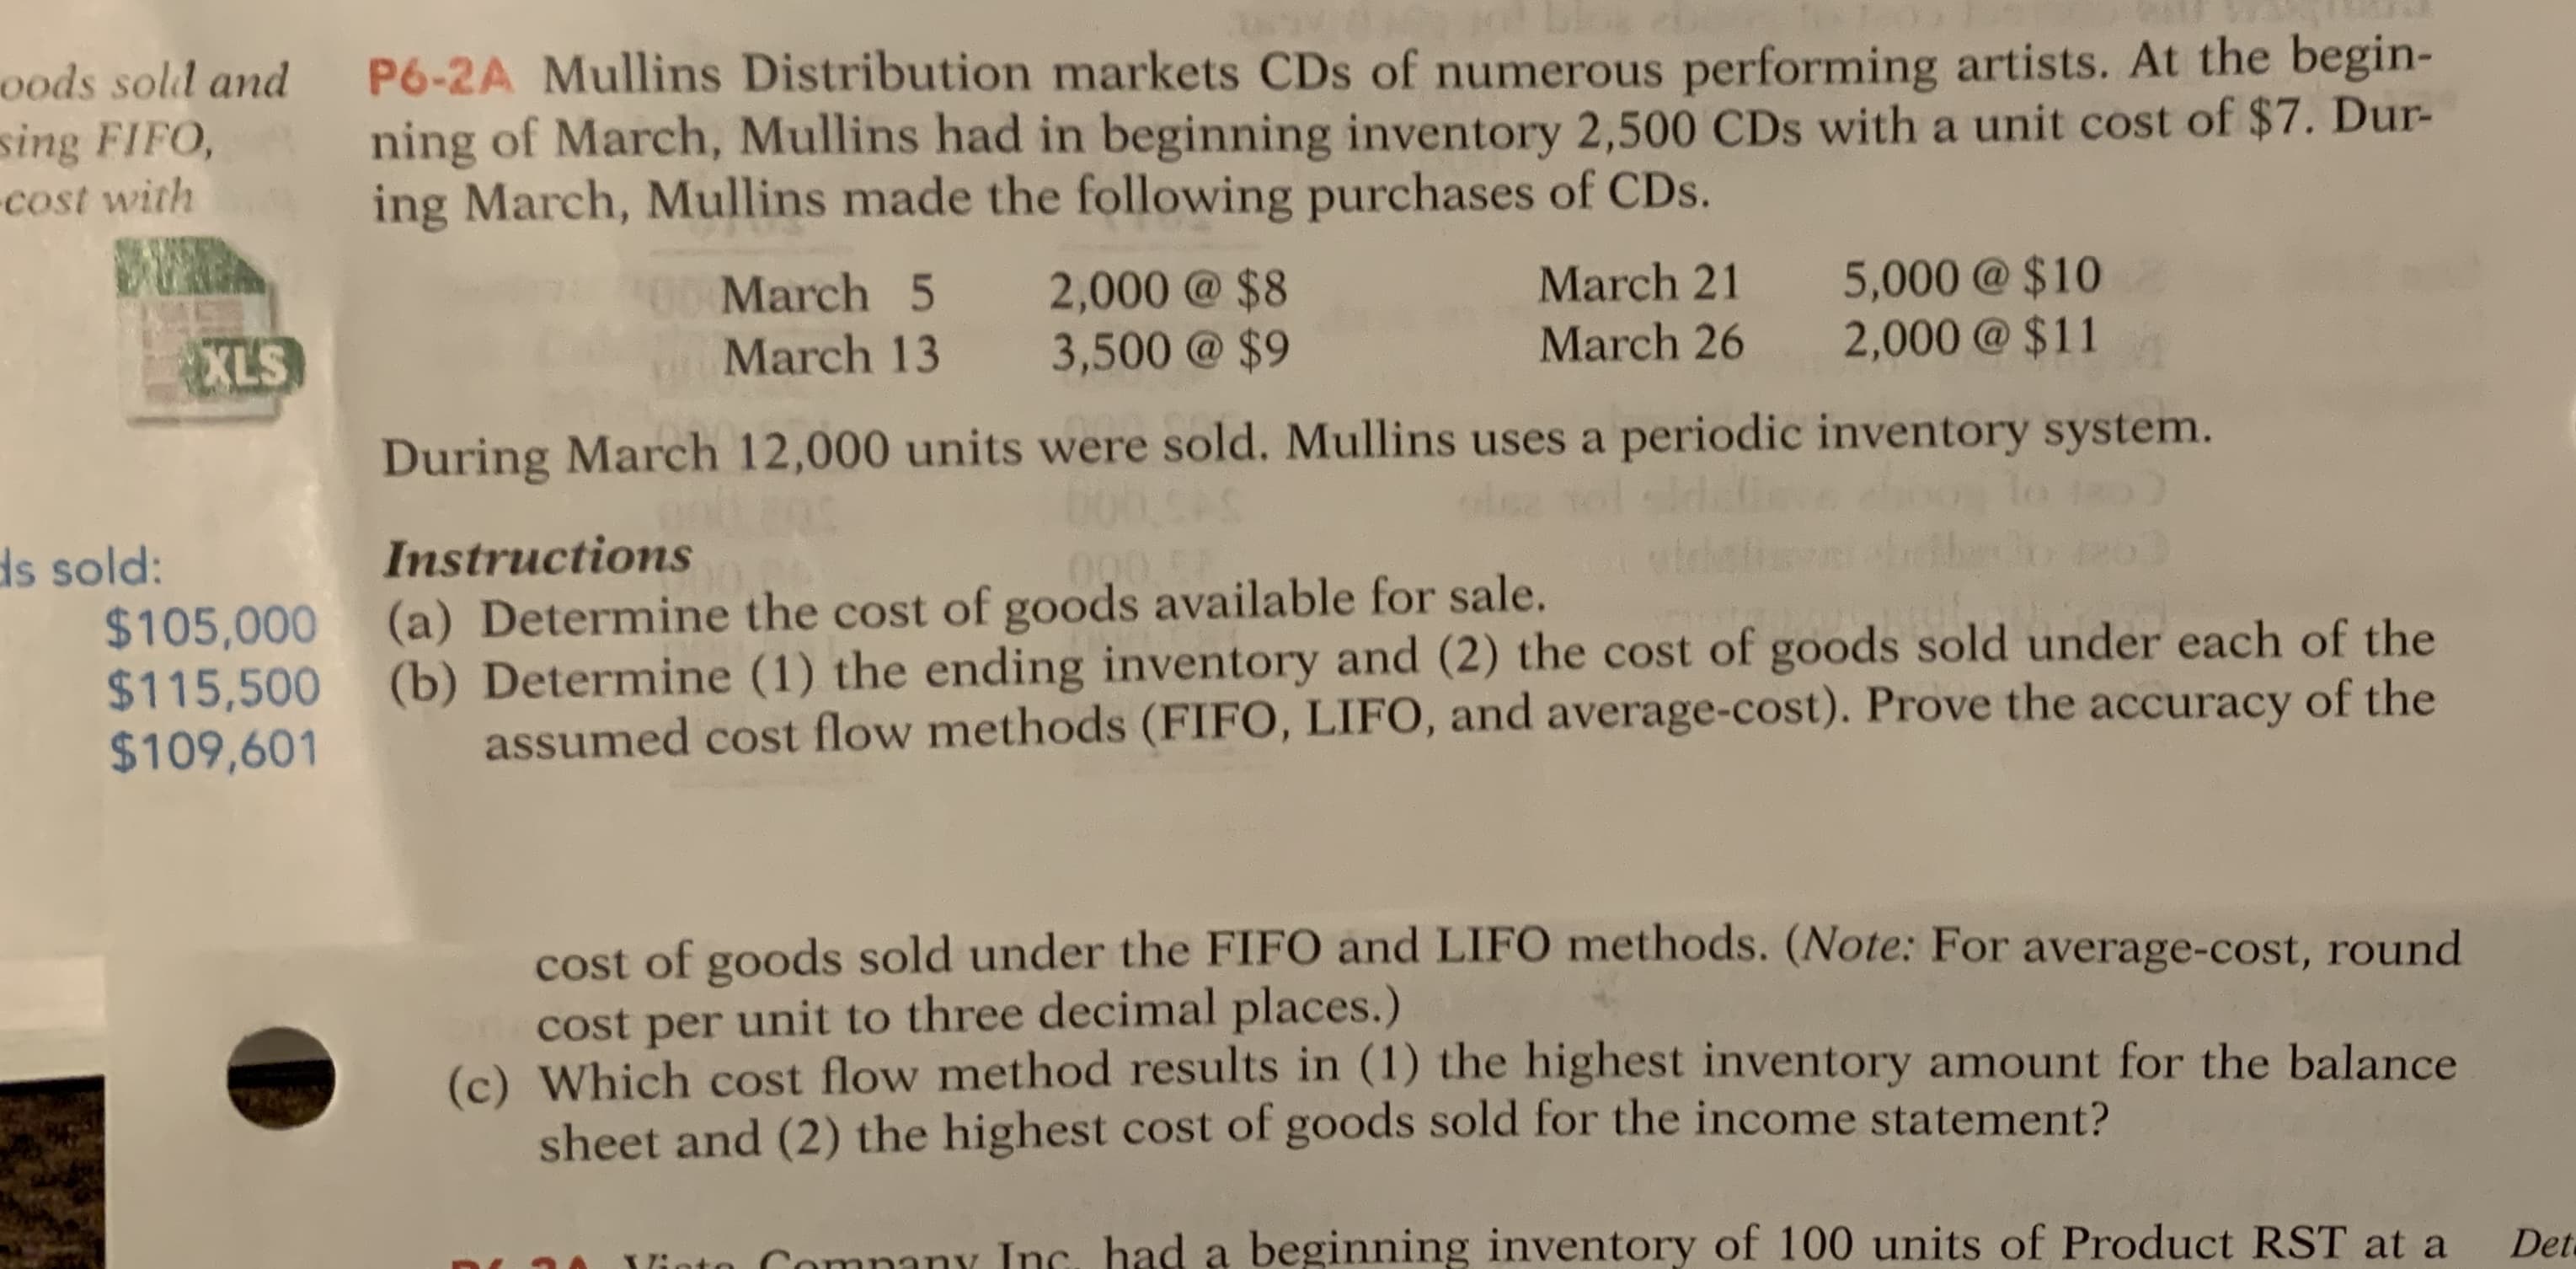 P6-2A Mullins Distribution markets CDs of numerous performing artists. At the begin-
ning of March, Mullins had in beginning inventory 2,500 CDs with a unit cost of $7. Dur-
ing March, Mullins made the following purchases of CDs.
March 5
2,000@ $8
3,500 @ $9
March 21
5,000@ $10
2,000@ $11
oMarch 13
March 26
During March 12,000 units were sold. Mullins uses a periodic inventory system.
CAS
Instructions
(a) Determine the cost of goods available for sale.
(b) Determine (1) the ending inventory and (2) the cost of goods sold under each of the
assumed cost flow methods (FIFO, LIFO, and average-cost). Prove the accuracy of the
cost of goods sold under the FIFO and LIFO methods. (Note: For average-cost, round
Cost per unit to three decimal places.)
